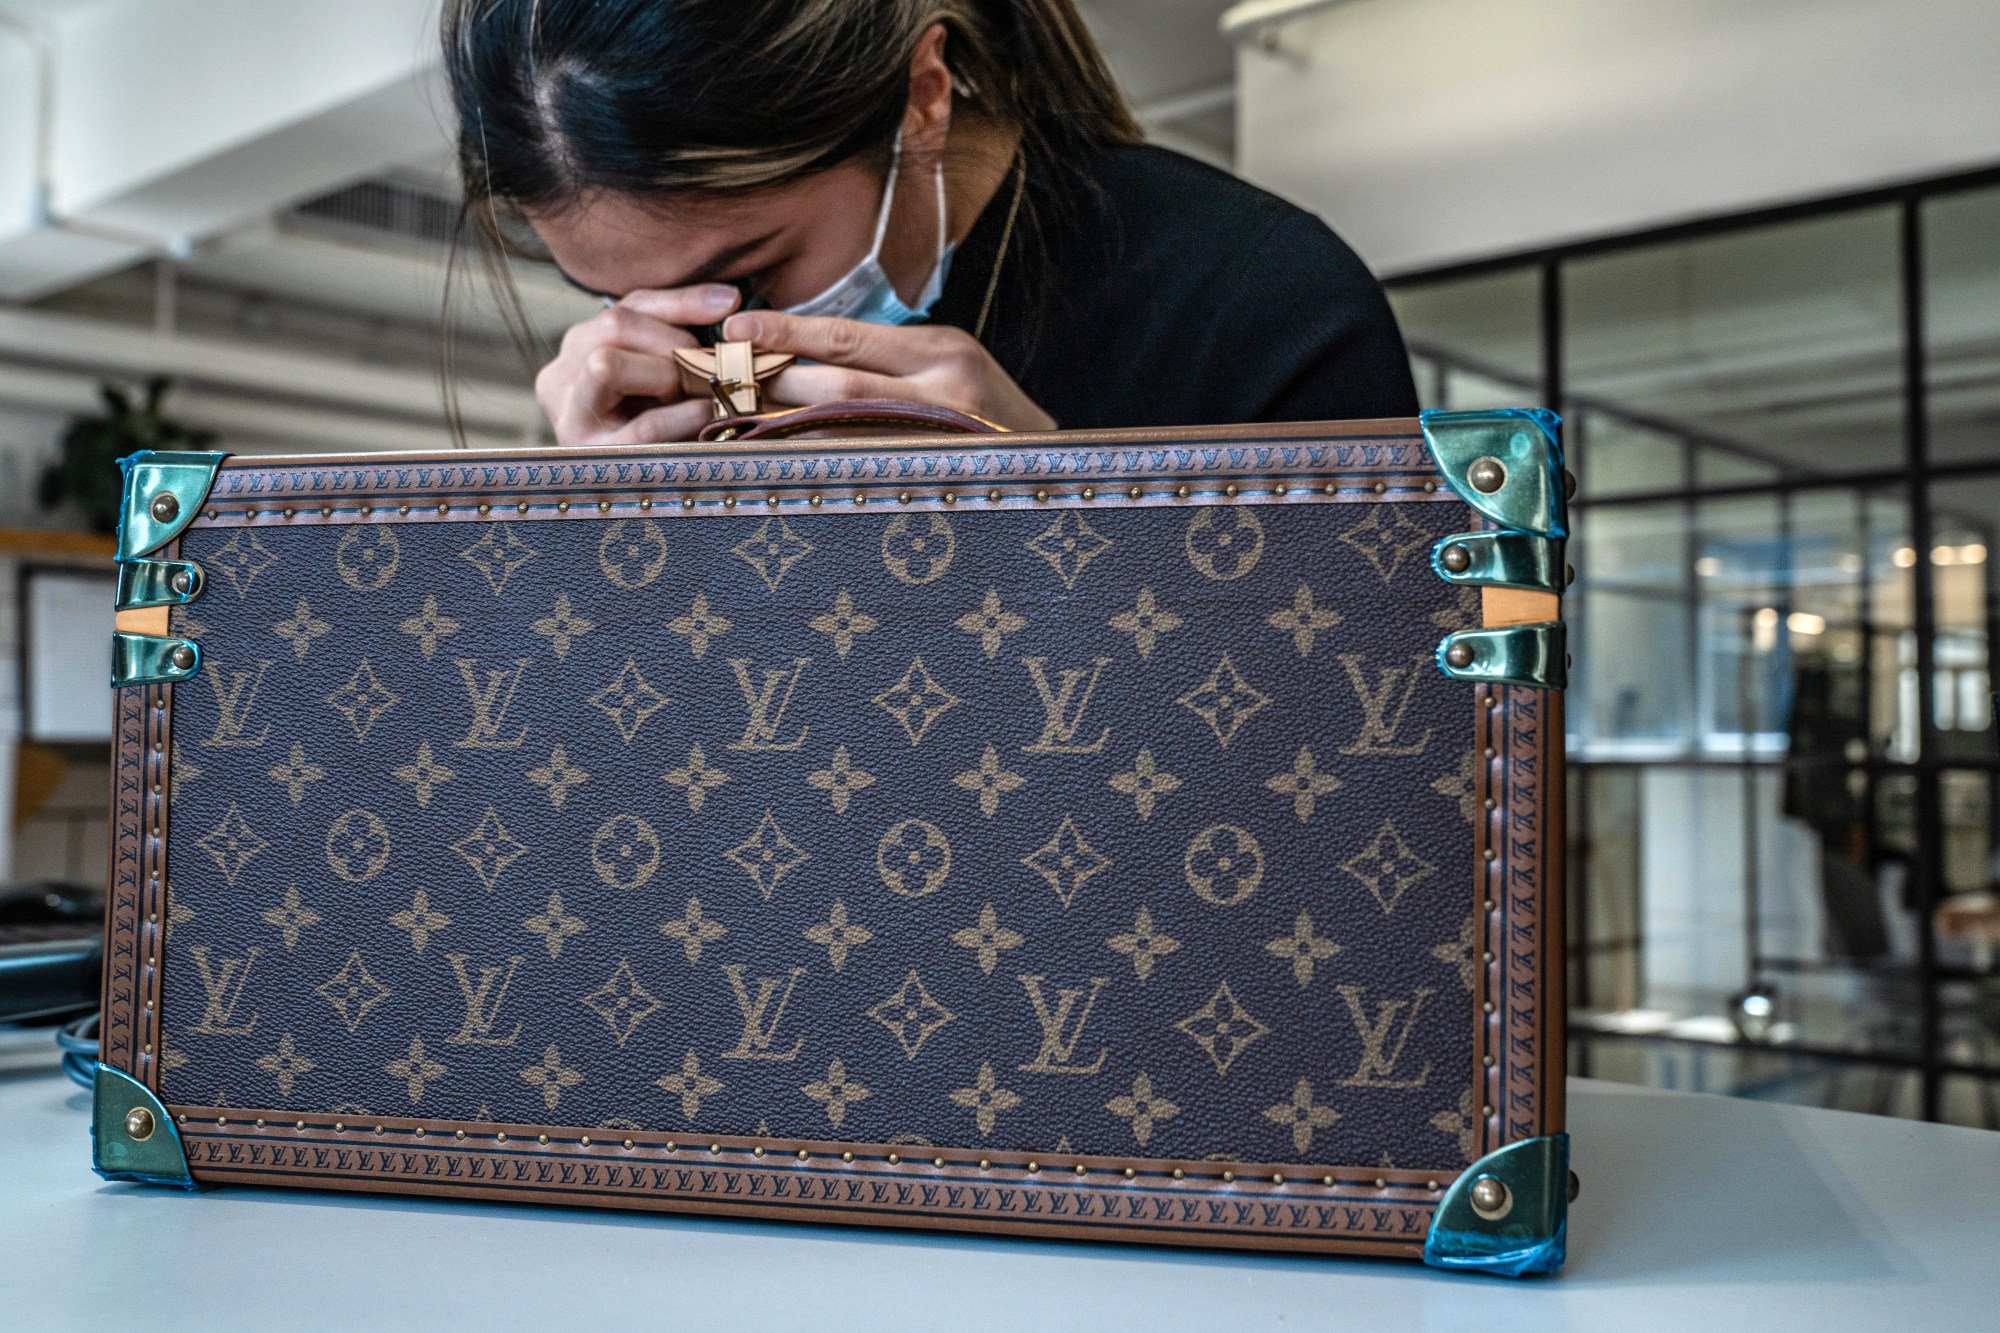 China's 'Exceptional' Luxury Fashion Demand Spurs Louis Vuitton to Add Jobs  in France